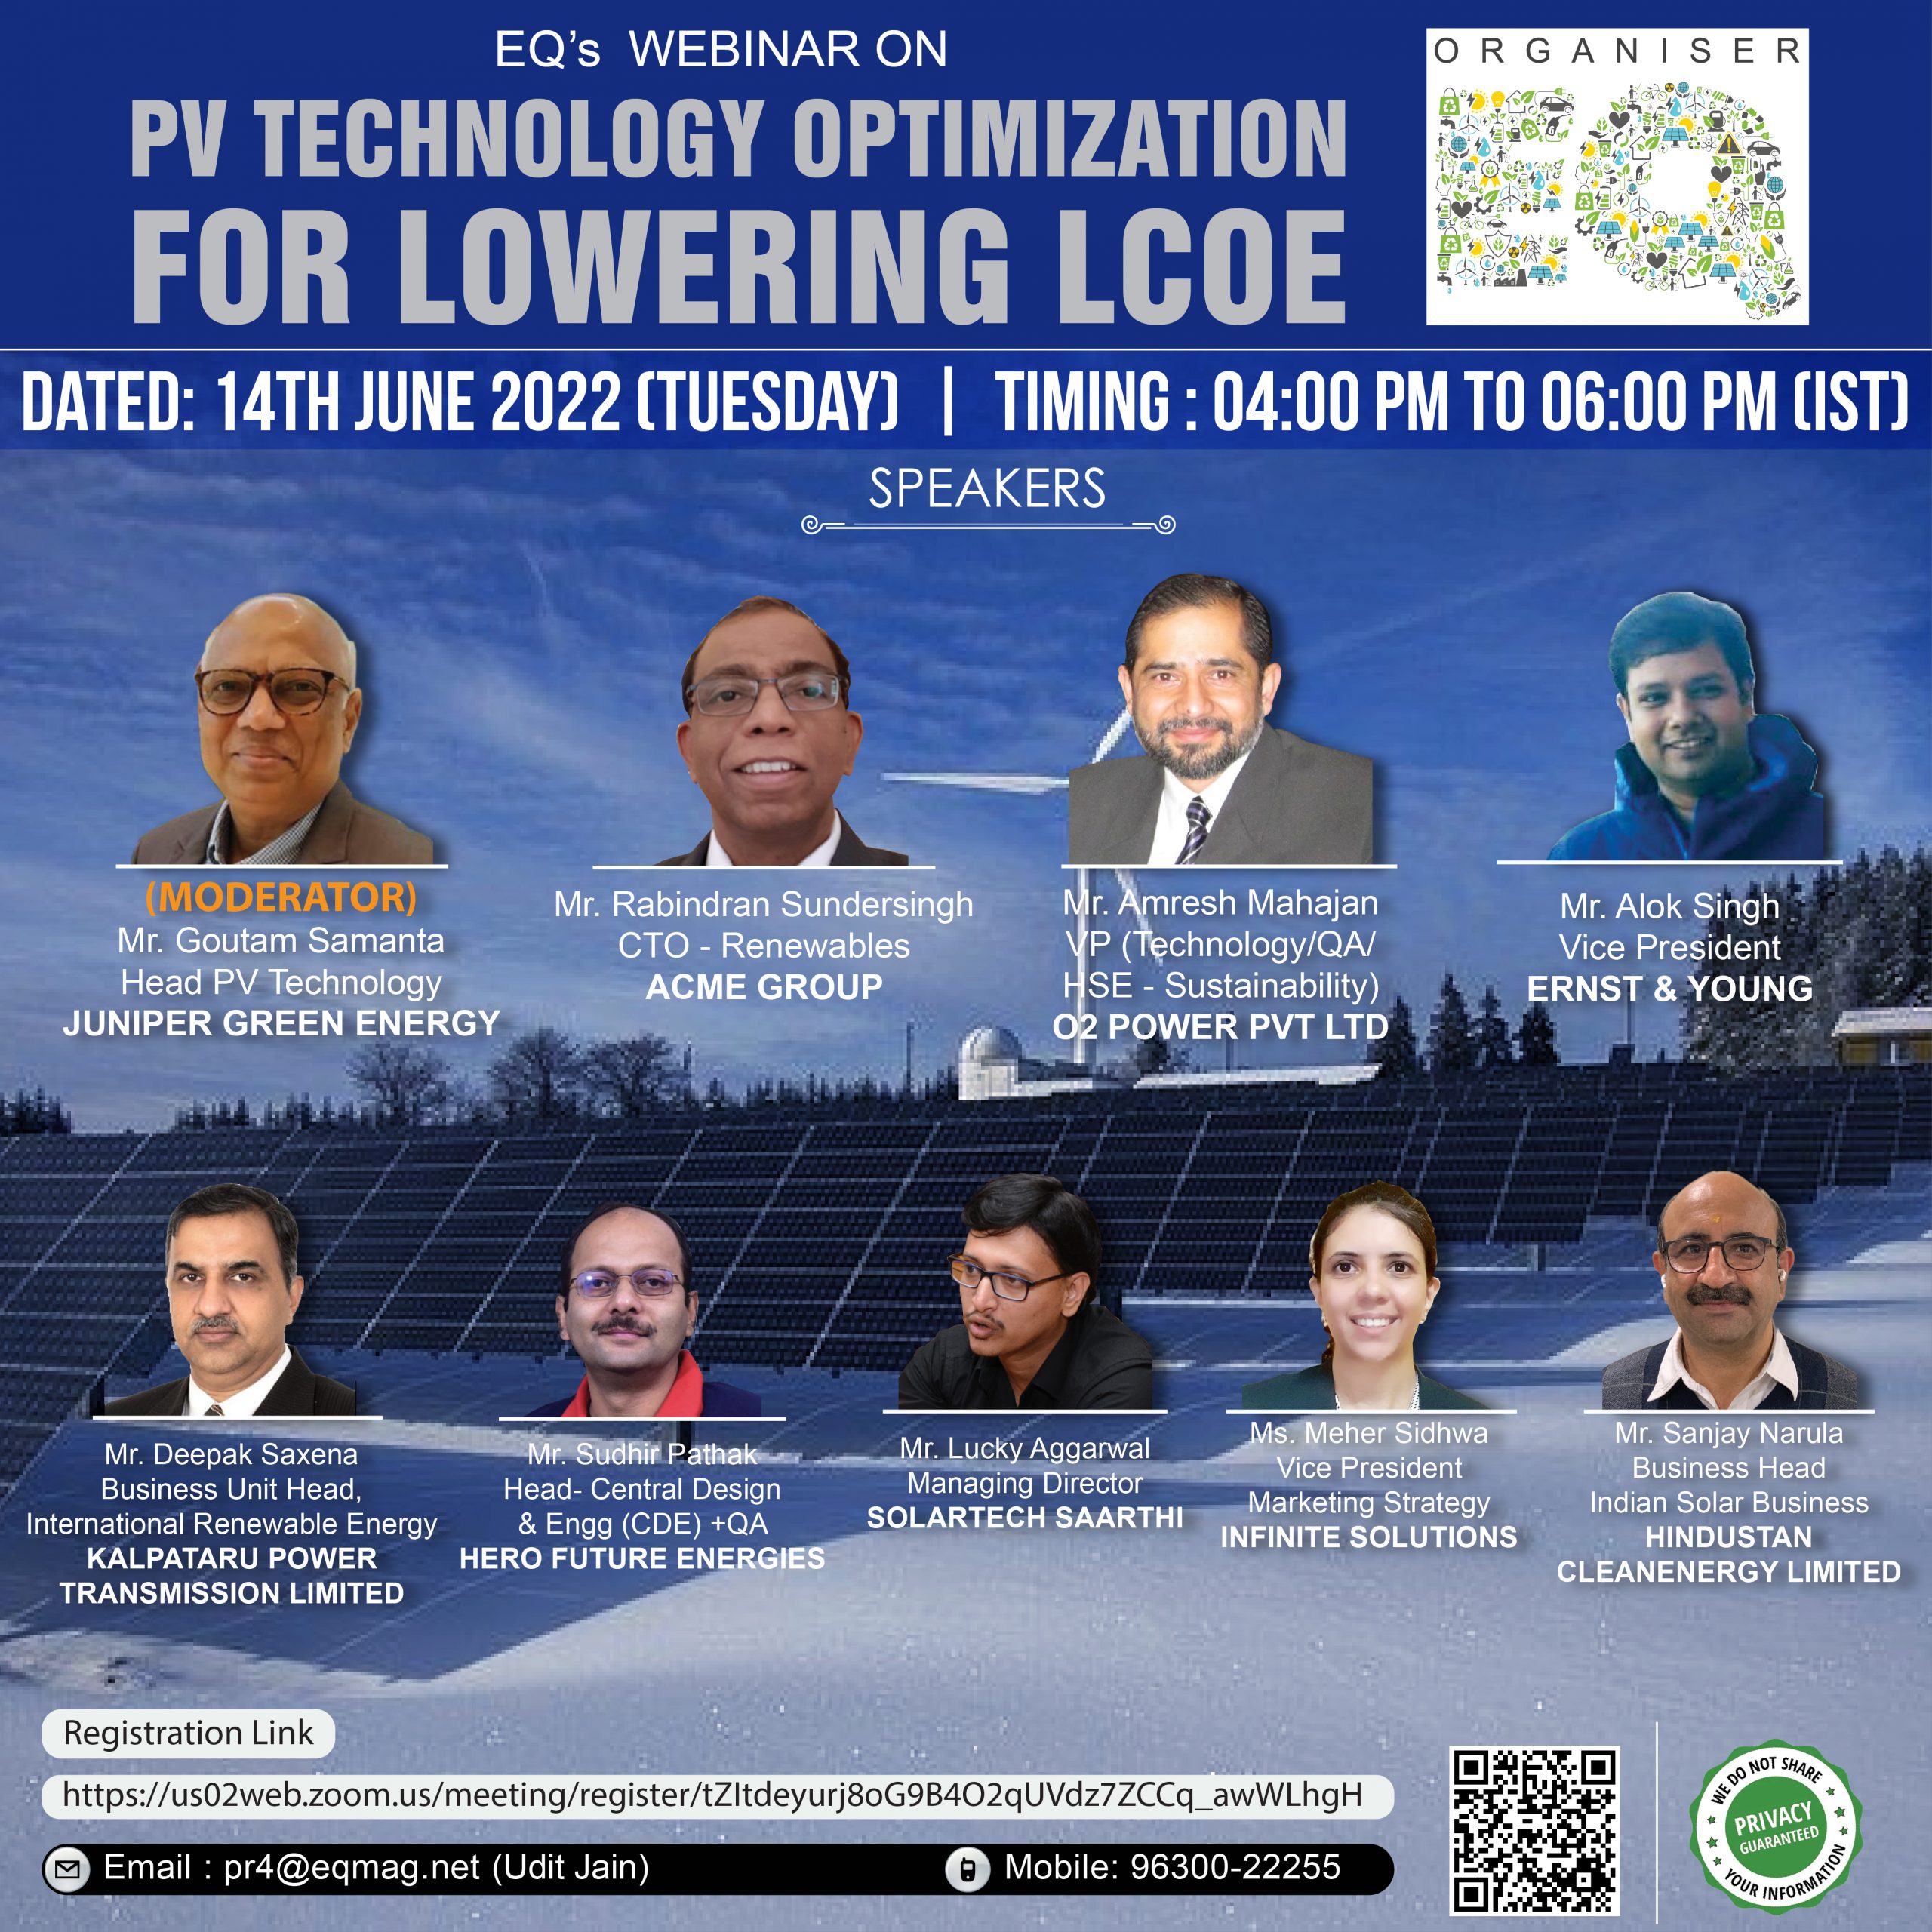 EQ Webinar on PV Technology Optimization for Lowering LCOE 14th June 2022 (Tuesday) 4:00 PM Onwards….Register Now!